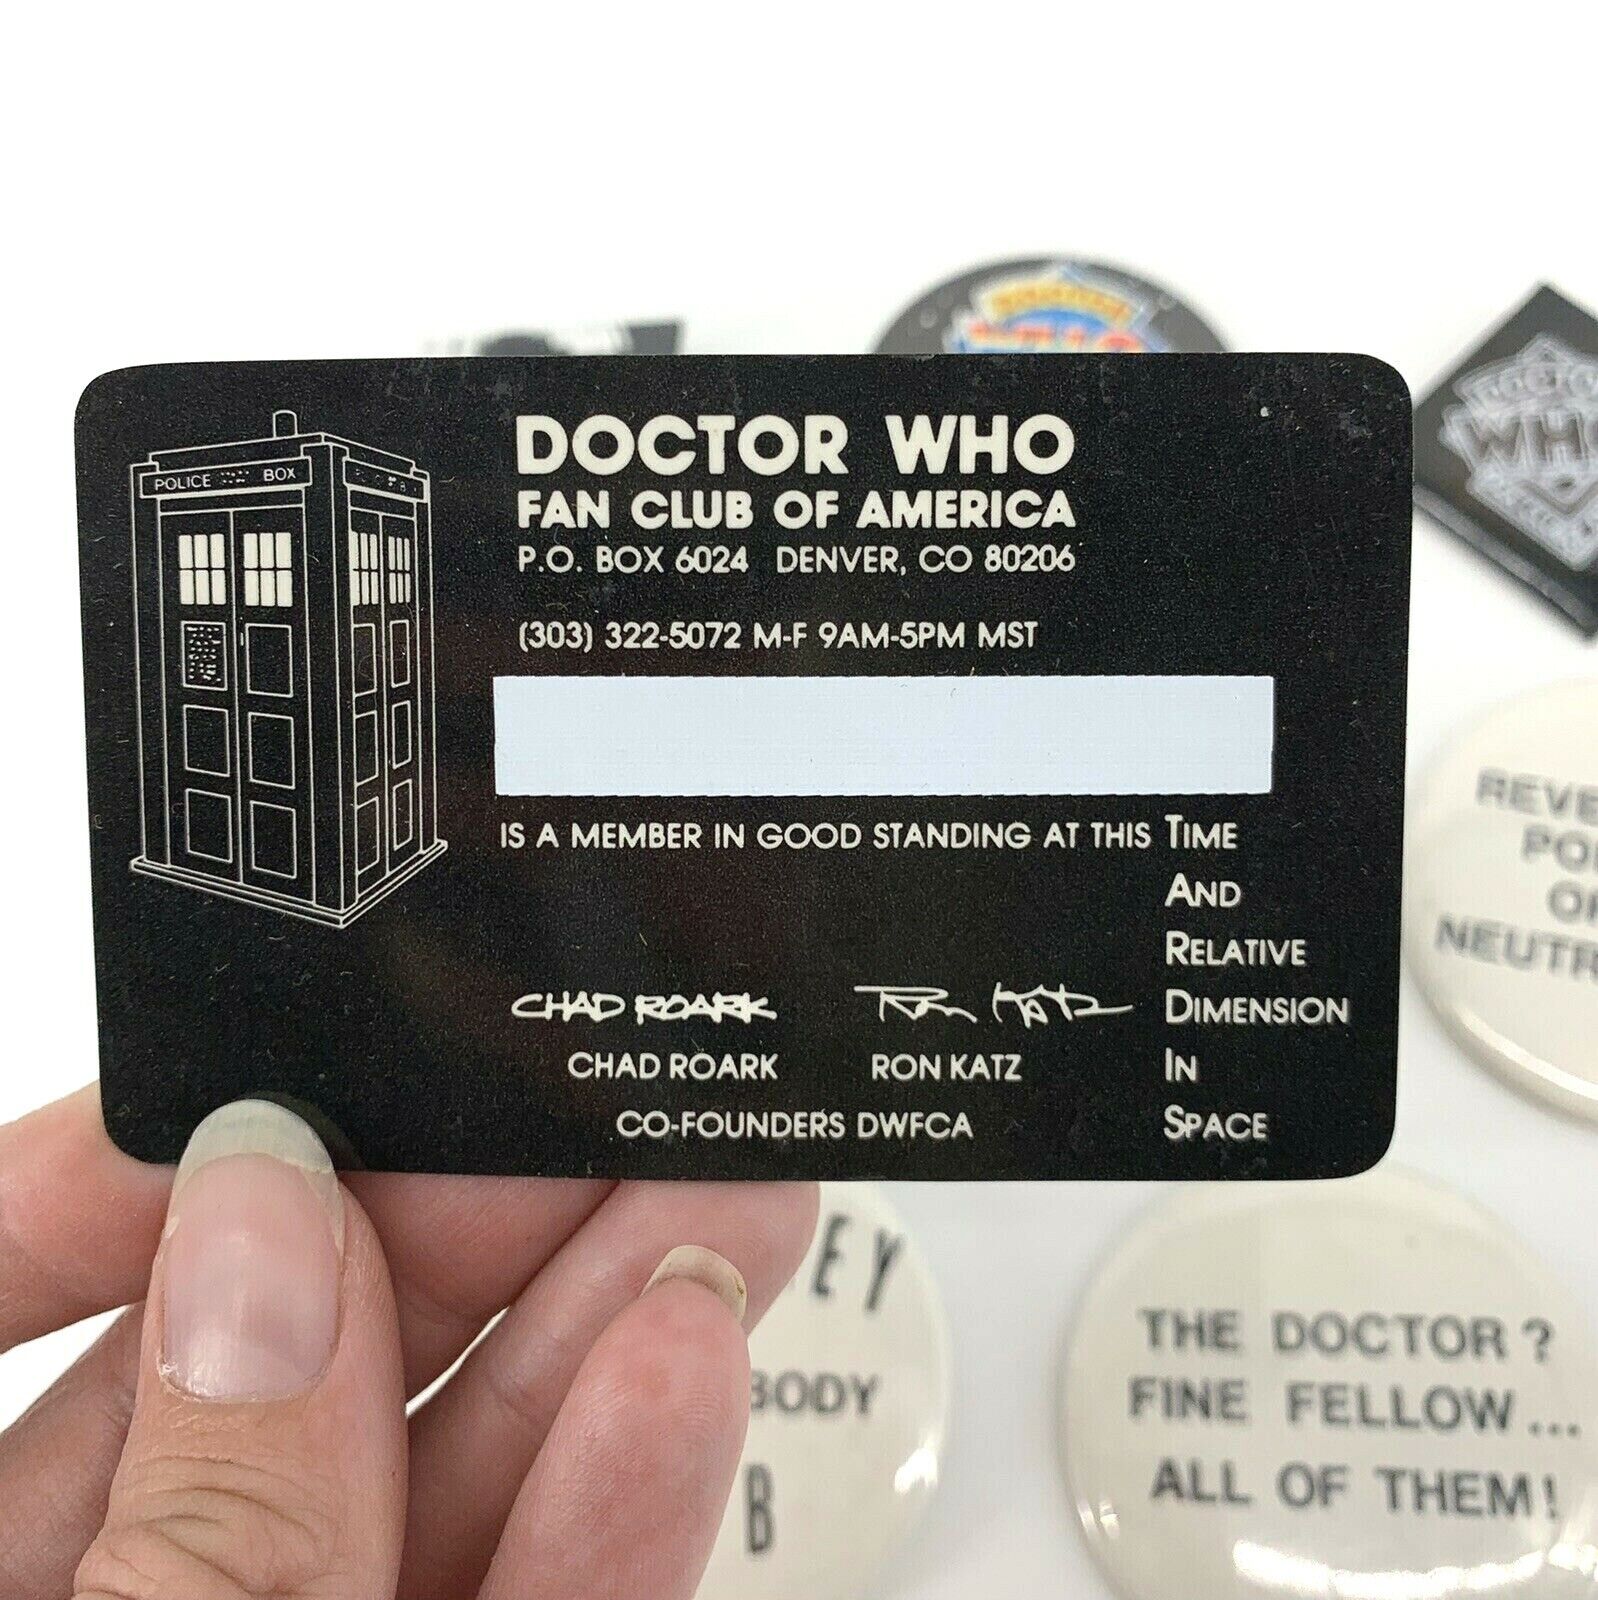 Vintage Dr Who Tom Baker Pin 8 Piece Collectible Lot Fan Club Gift Set  Без бренда - фотография #9